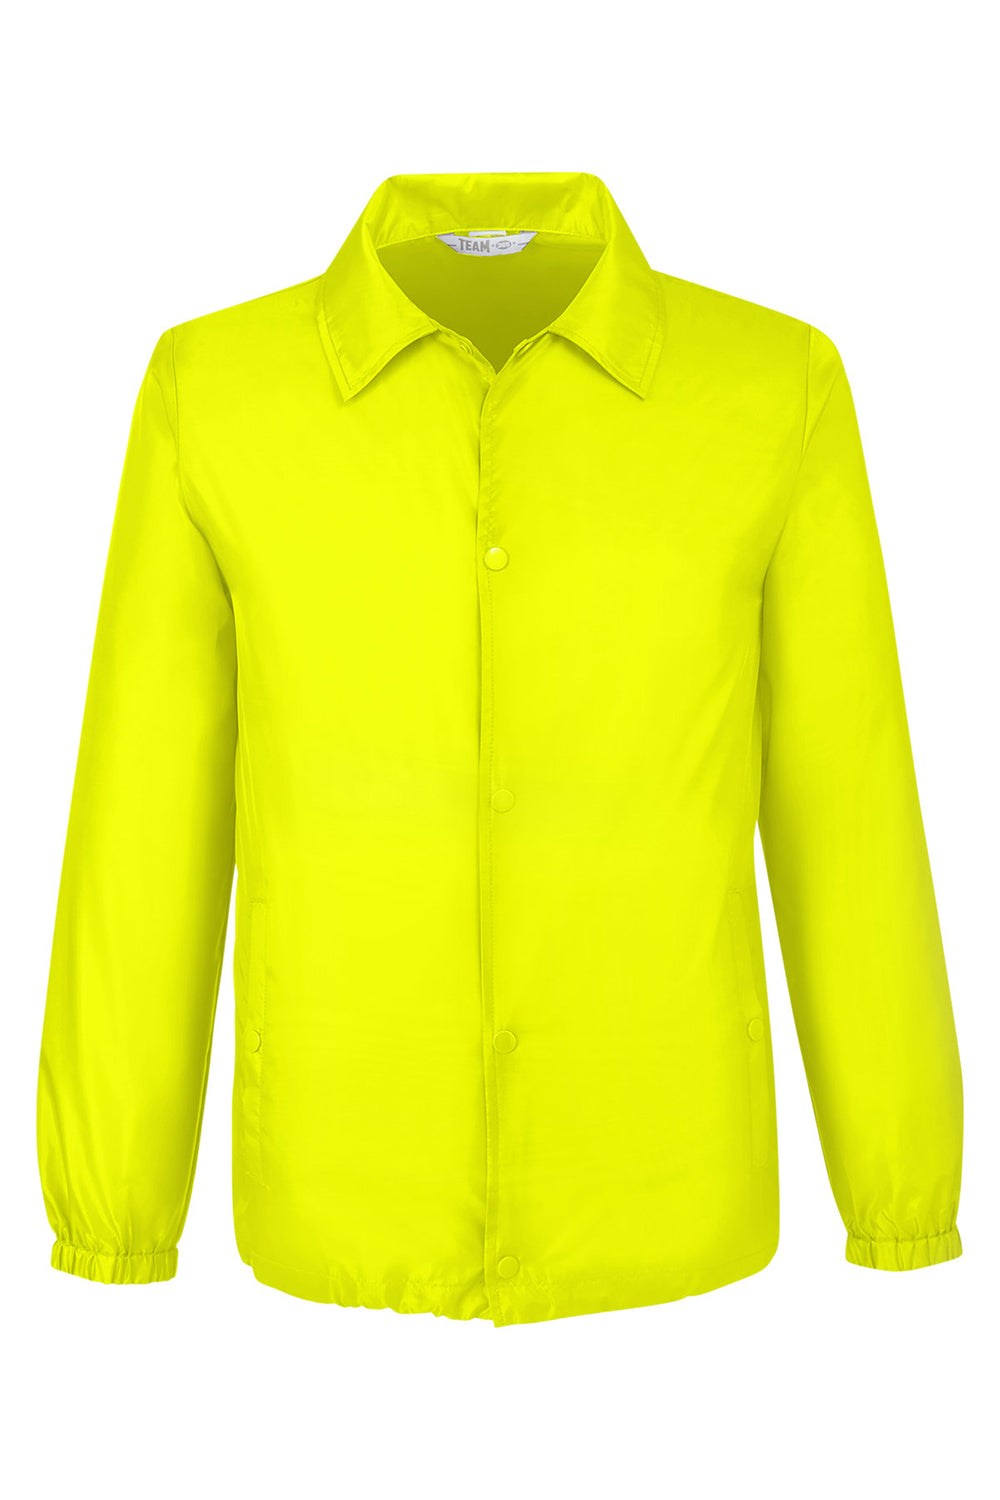 Team 365 TT75 Mens Zone Protect Snap Down Coaches Jacket Safety Yellow Flat Front